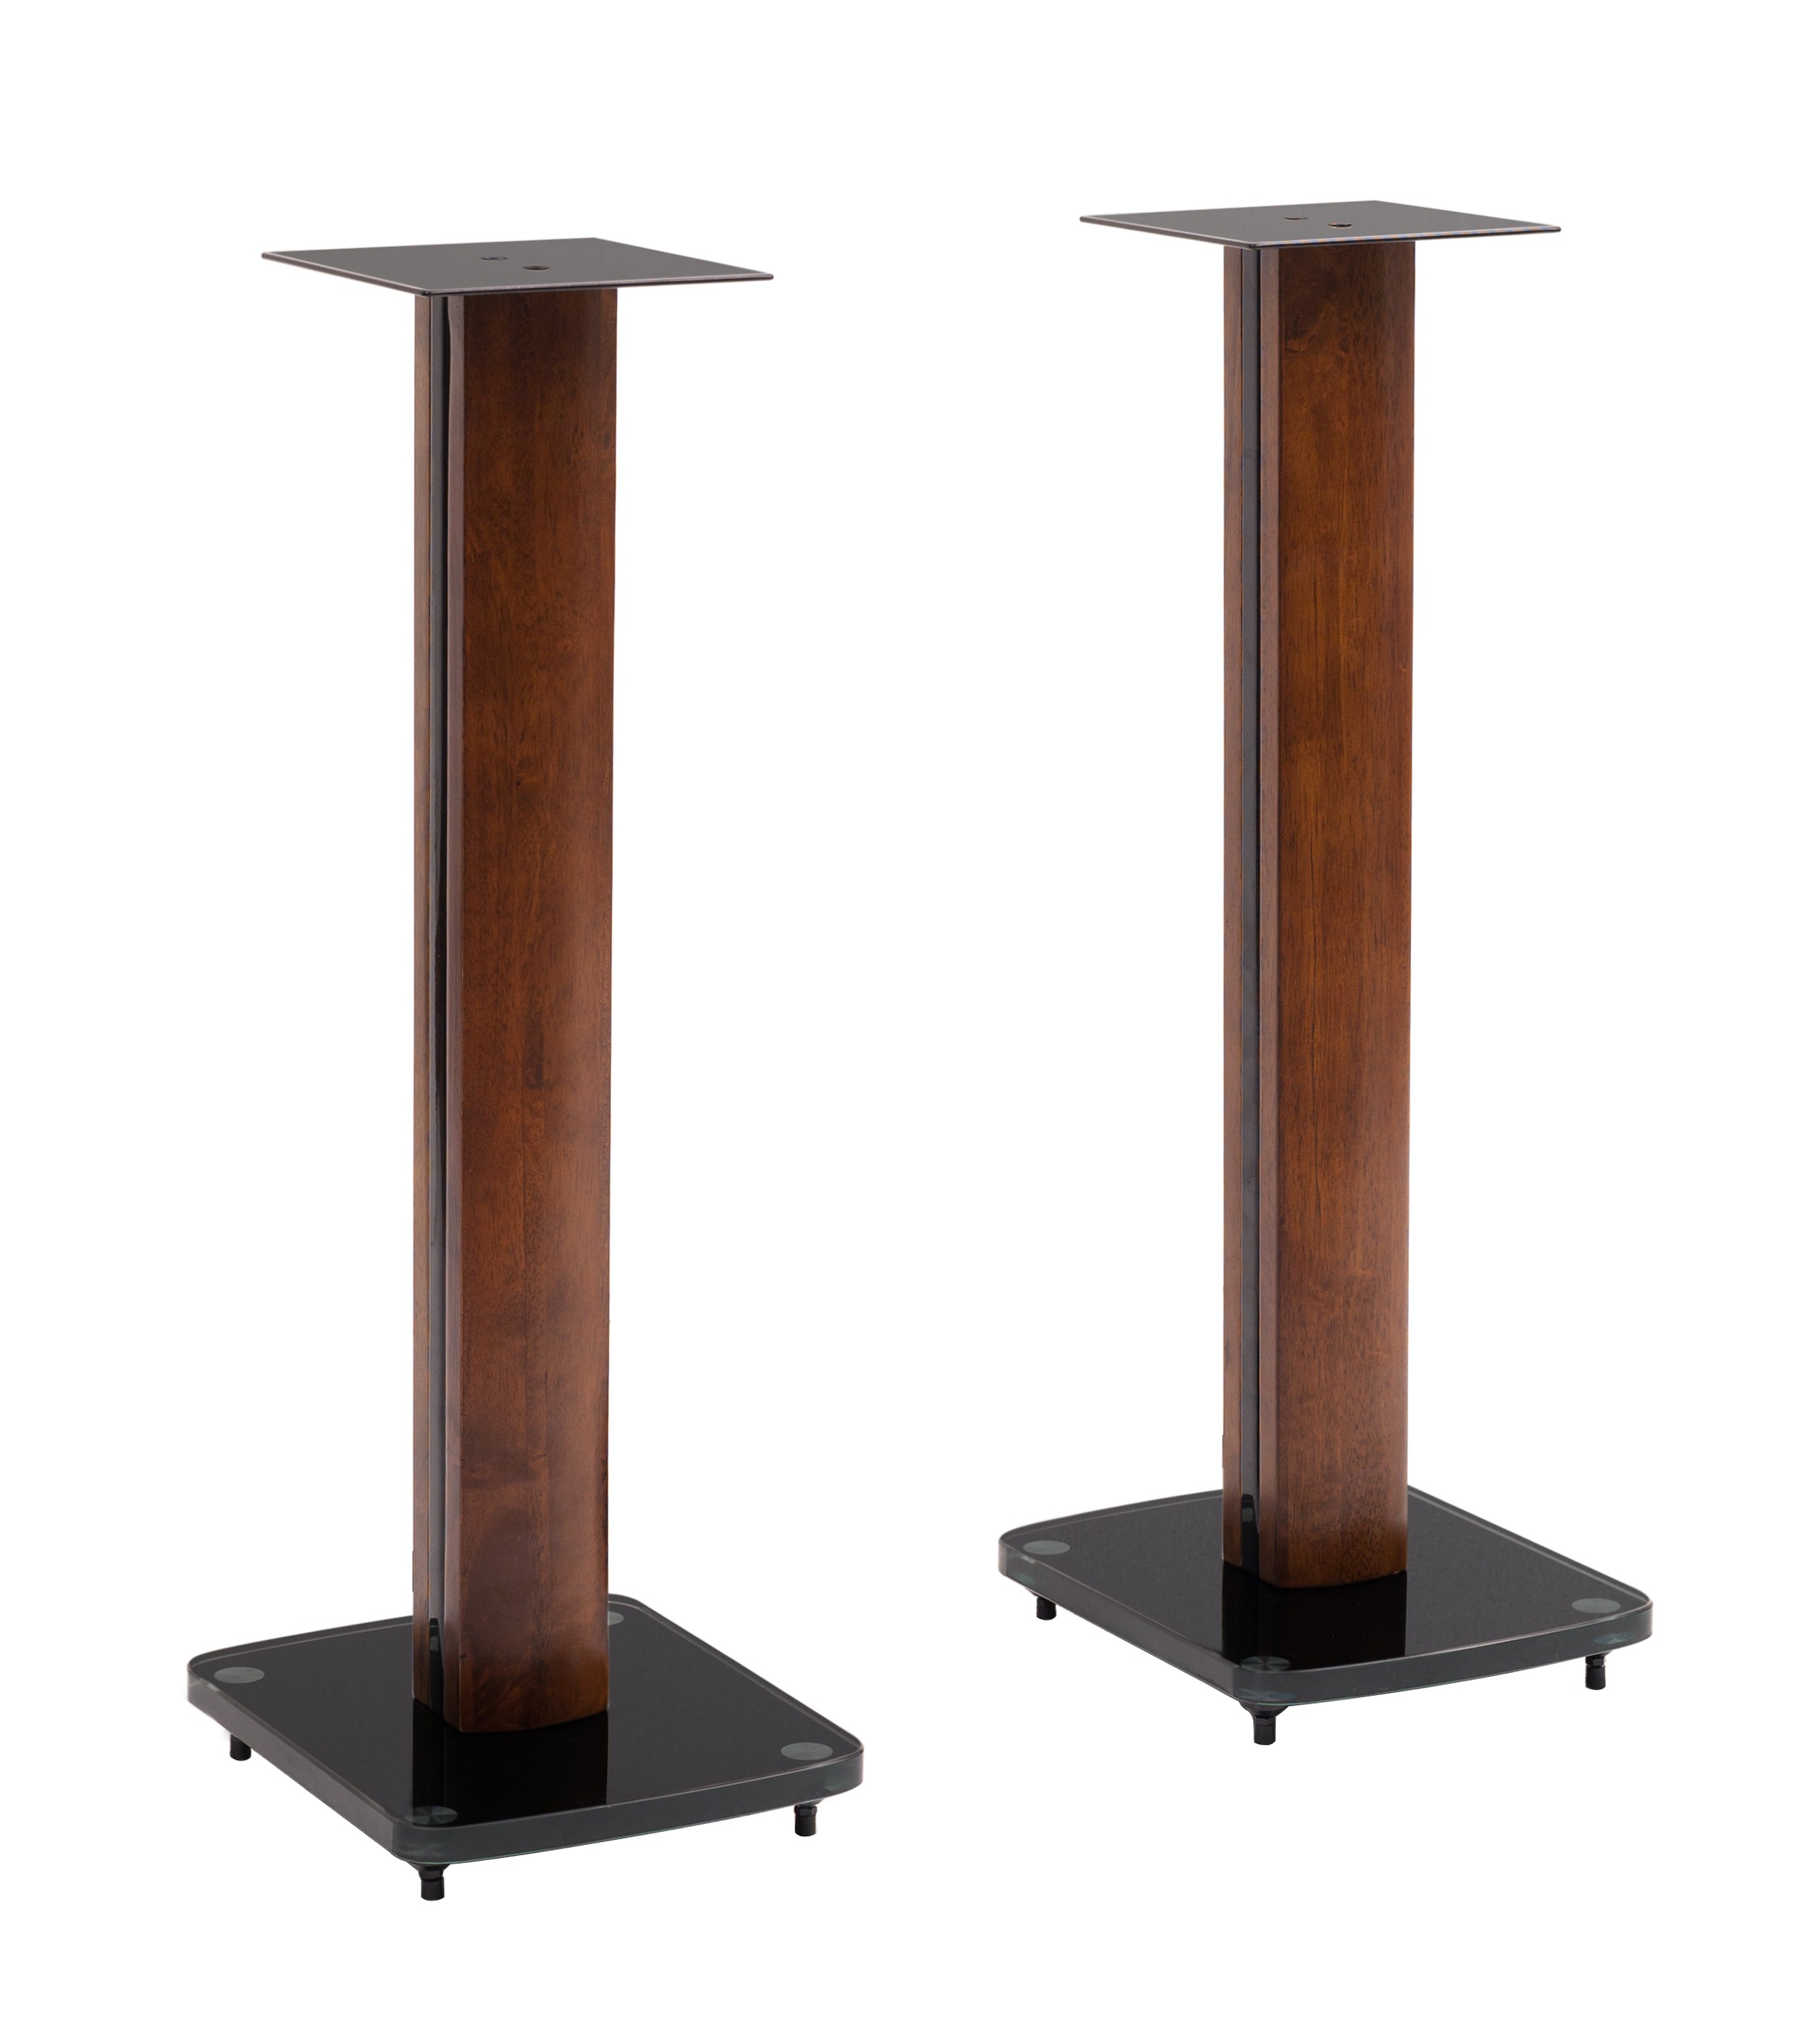 Transdeco international 30 fixed height speaker stands